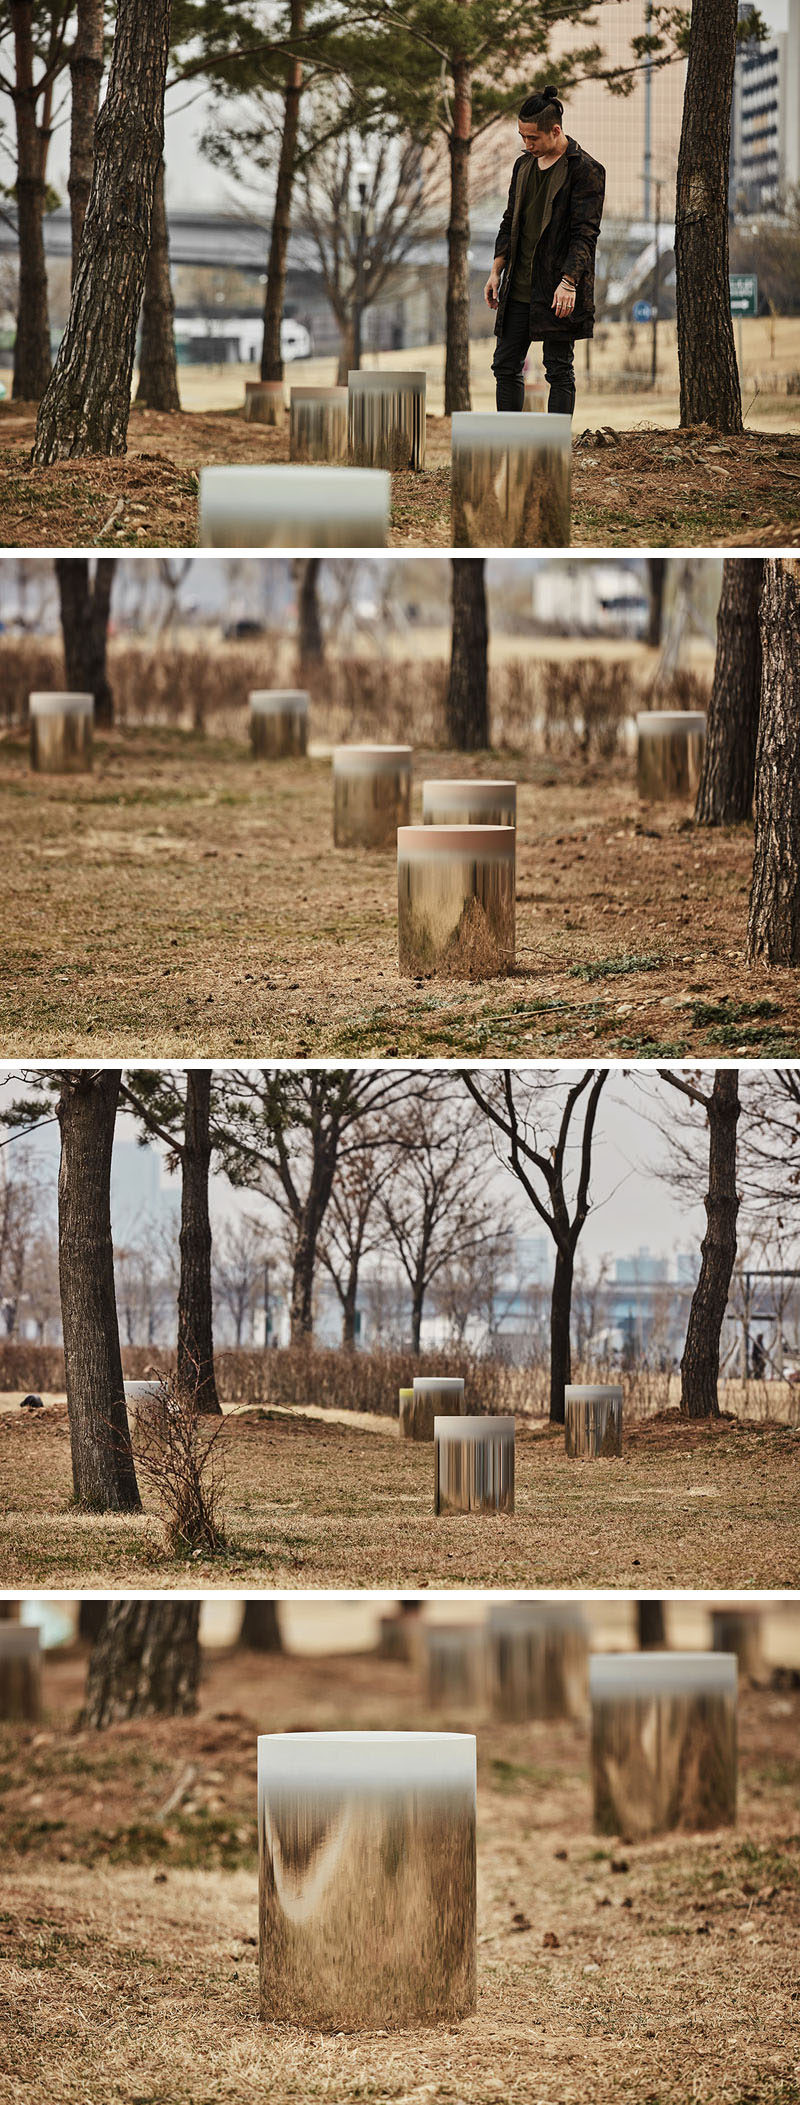 South Korean designer Jiyoun Kim has created the Dokkaebi Stools, a collection of 24 mirrored stainless steel stools with each a painted seat, that will grace the Hangang Art Park in Seoul.